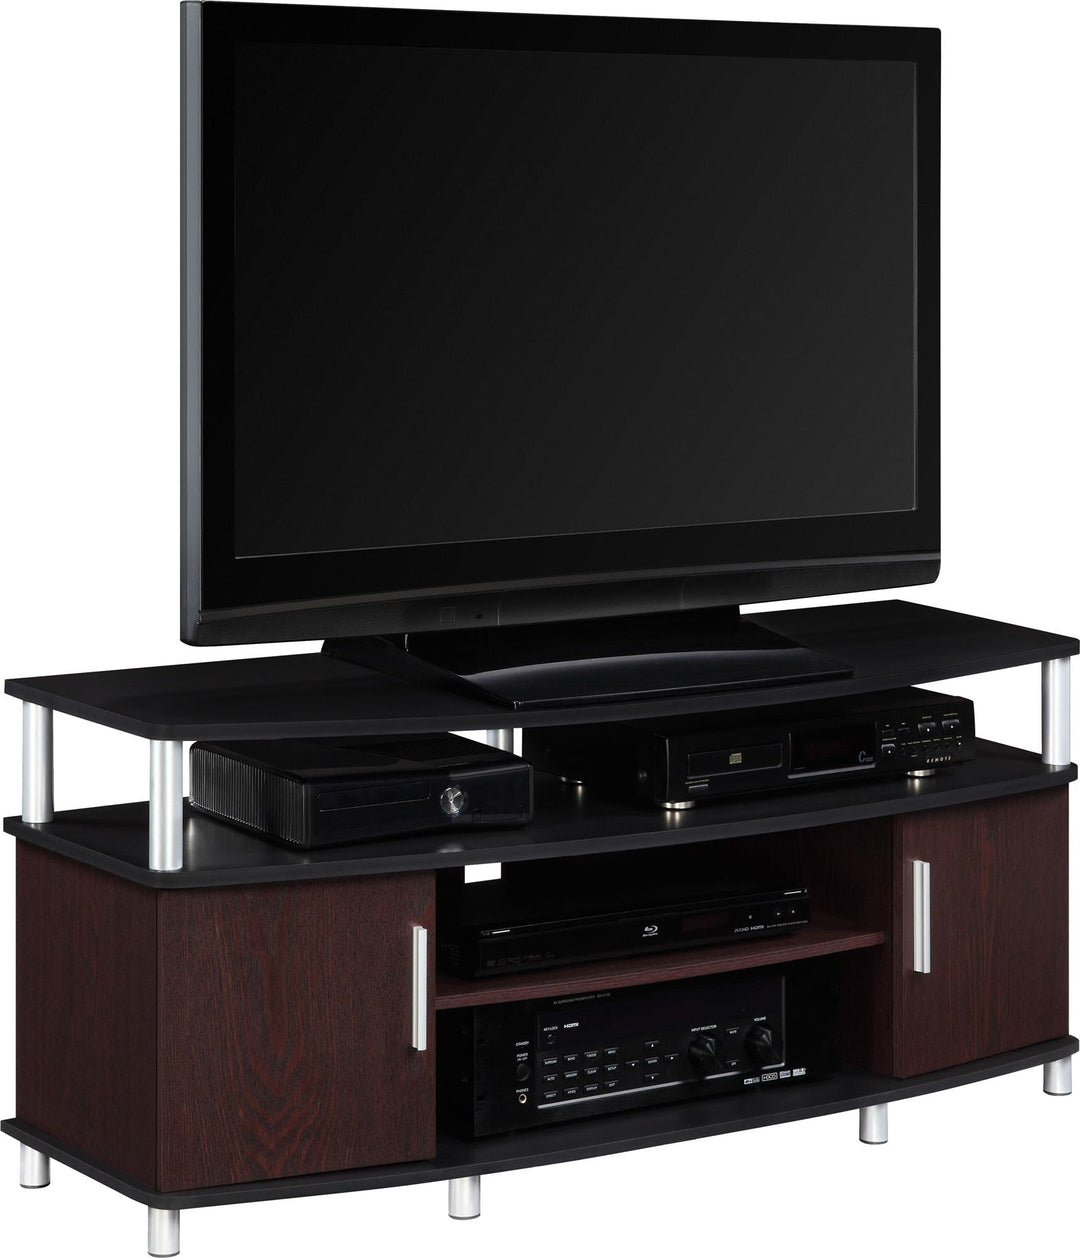 Modern TV stand with storage shelves -  Cherry